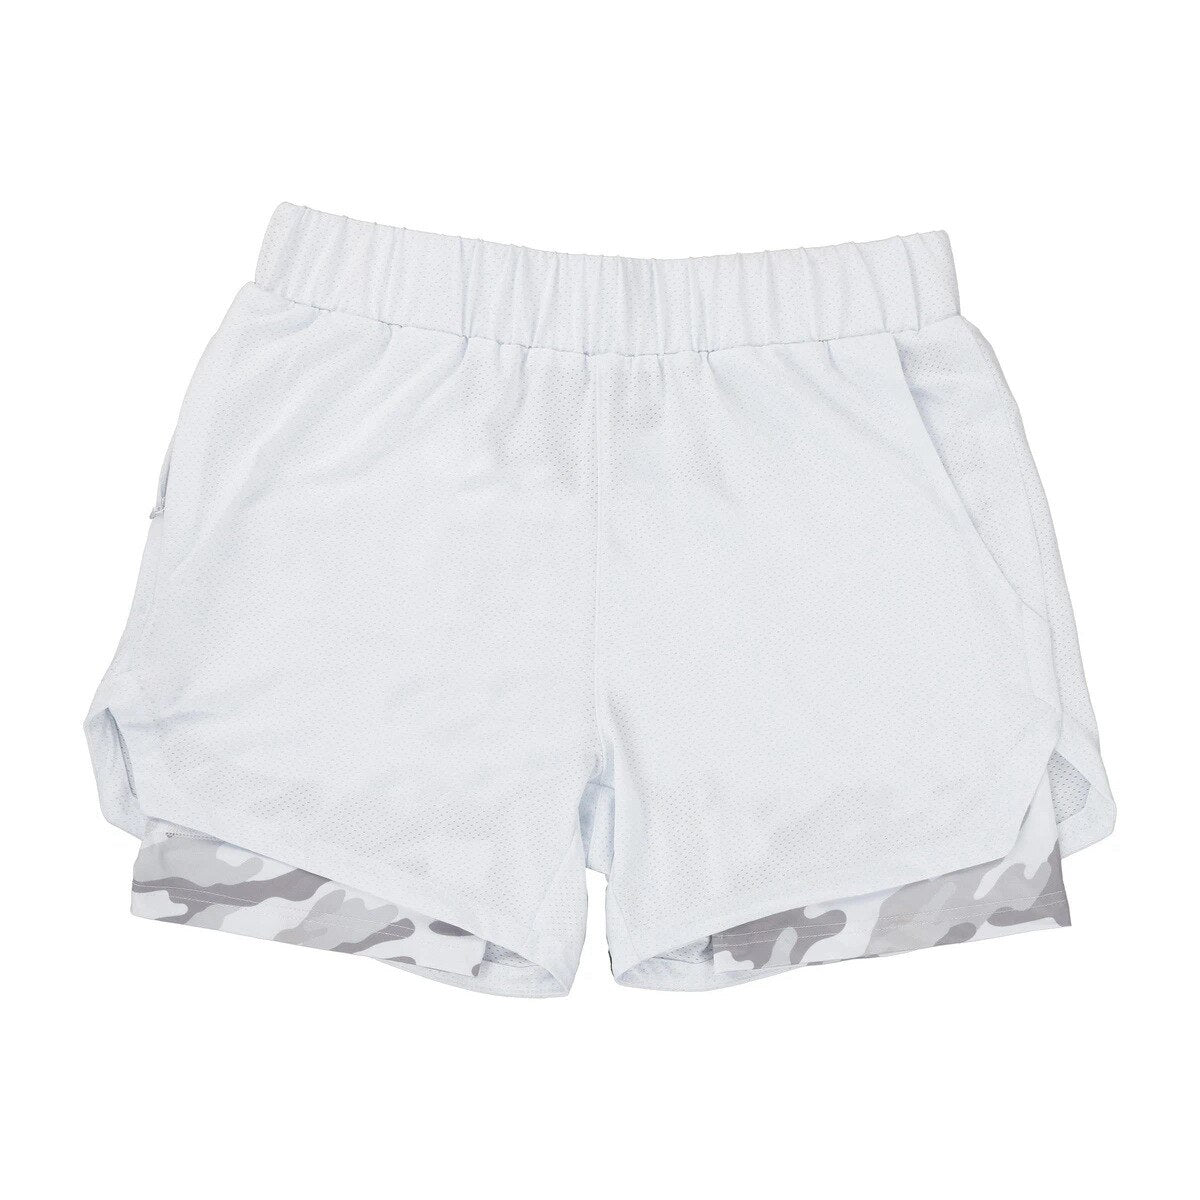 Running Shorts & Fitness Double-deck Shorts For Men